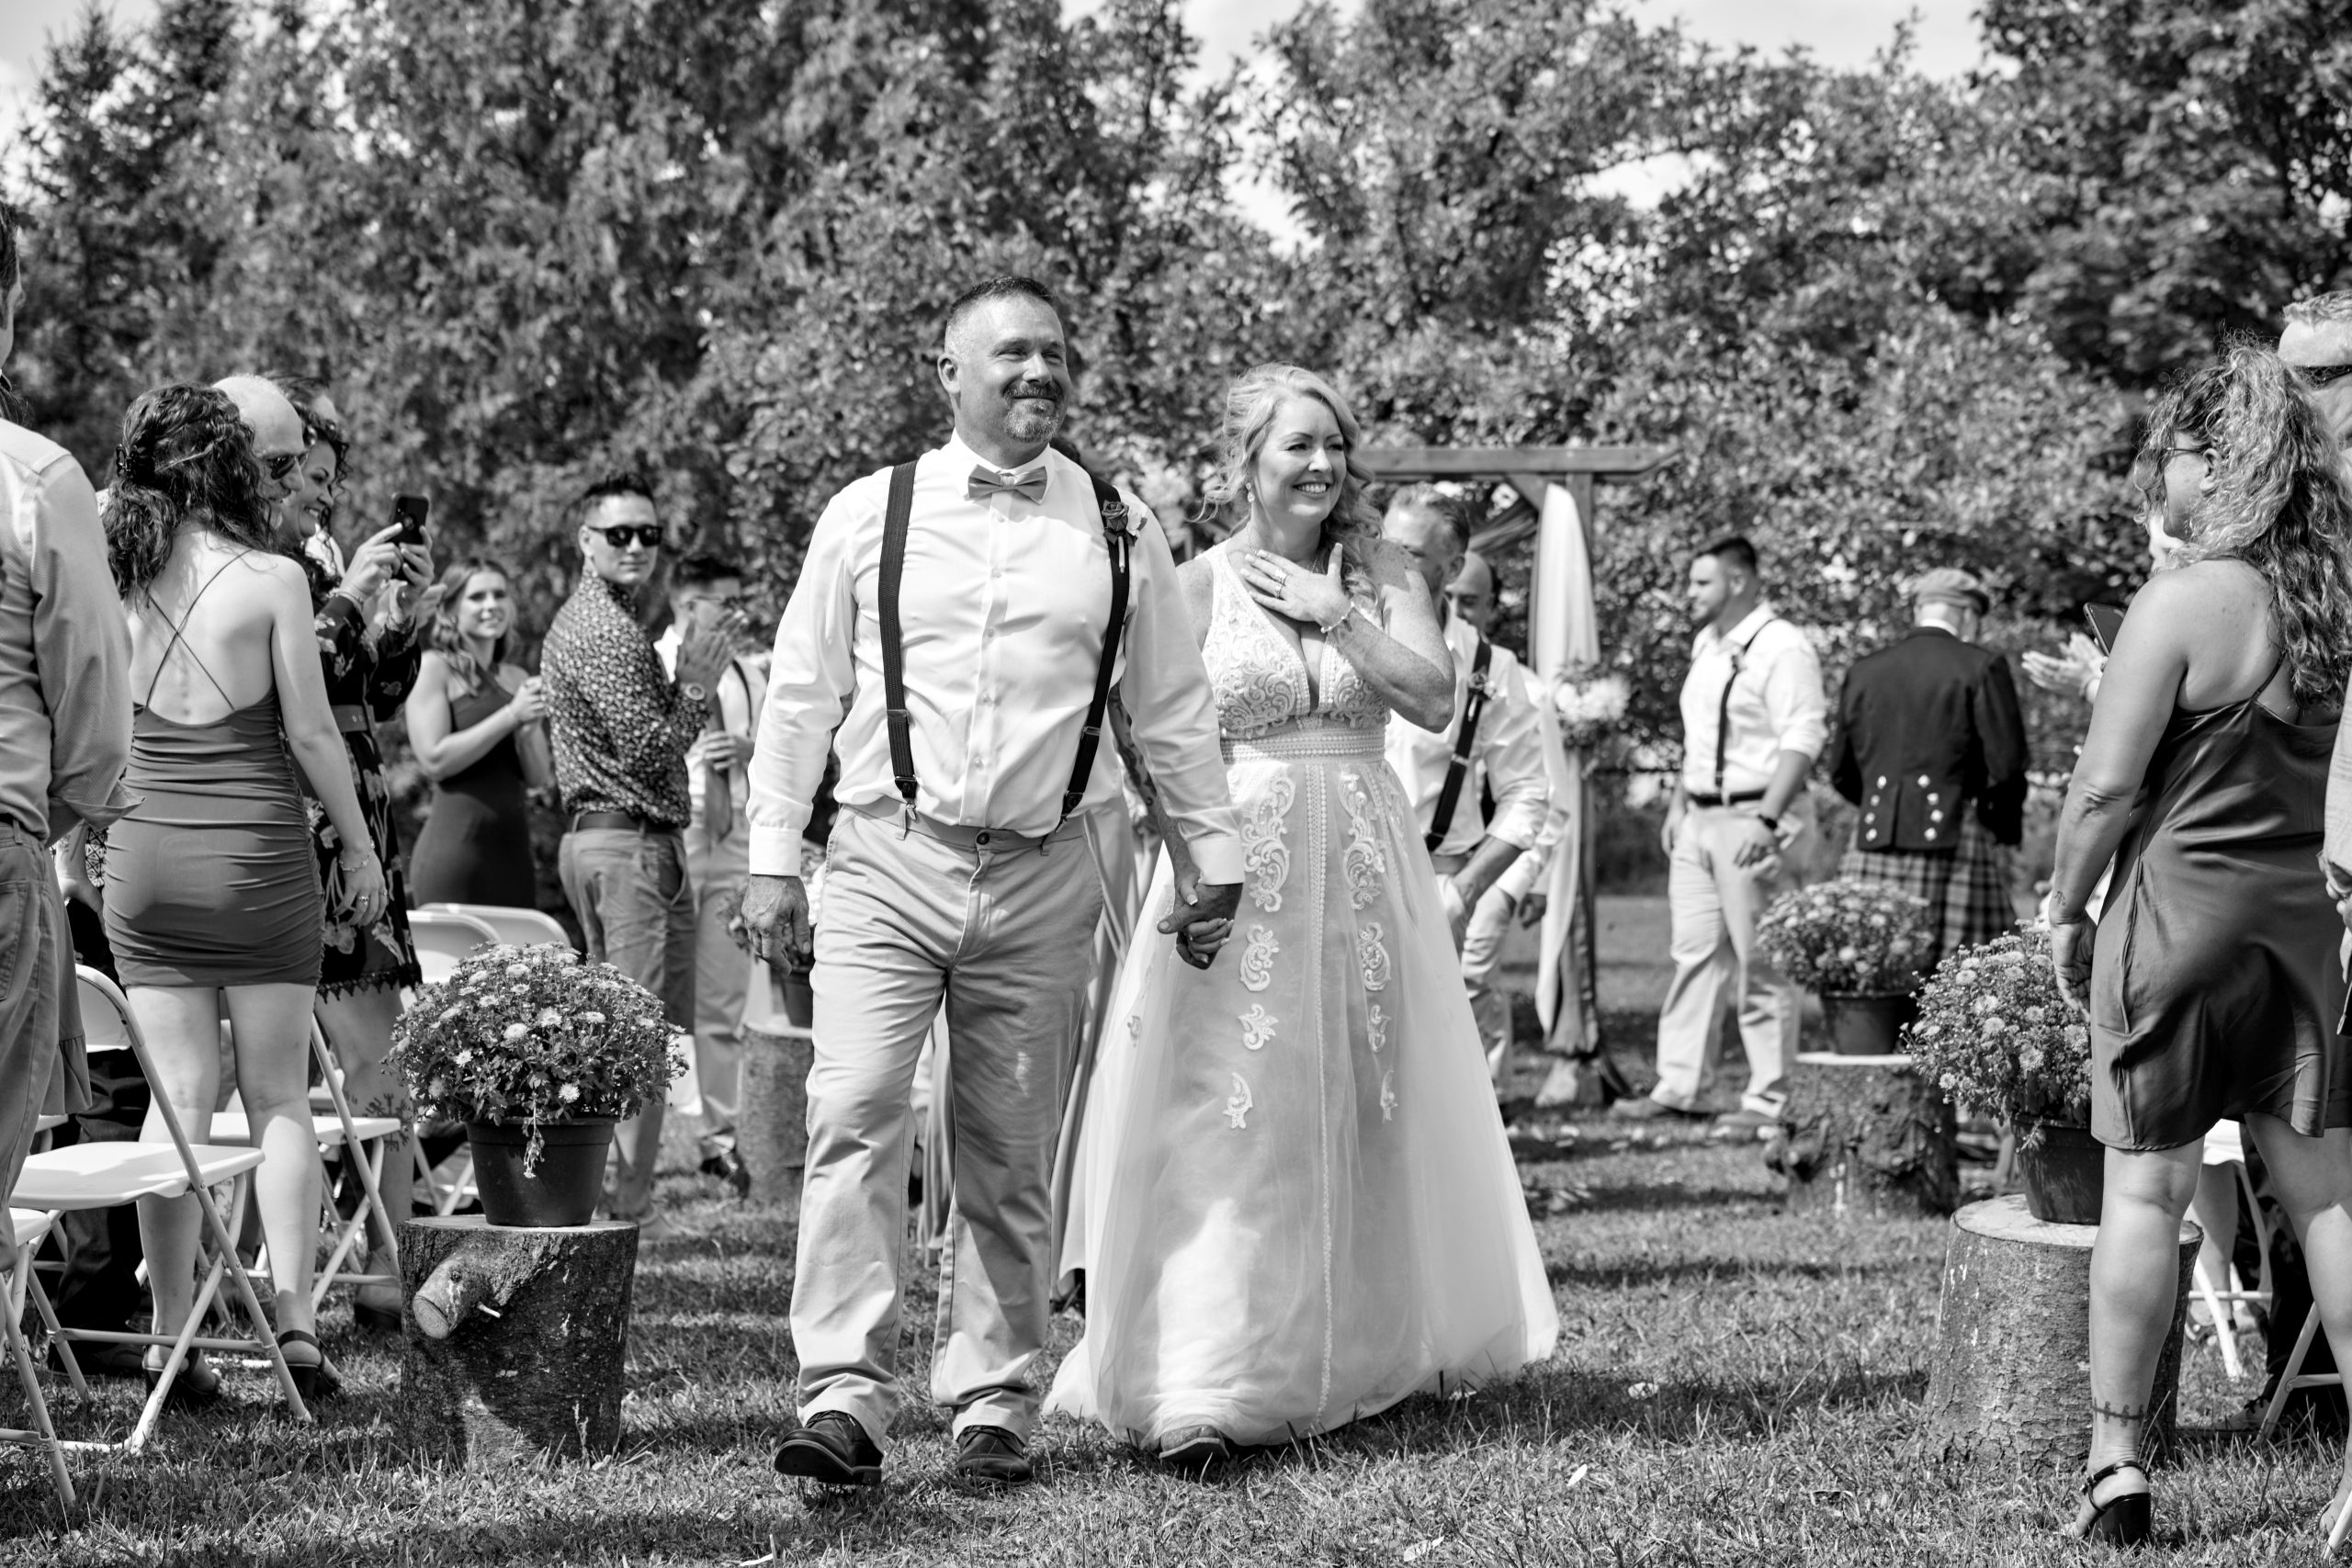 An emotional Bride and Groom Walking Down Aisle Together at Rustic Country Wedding